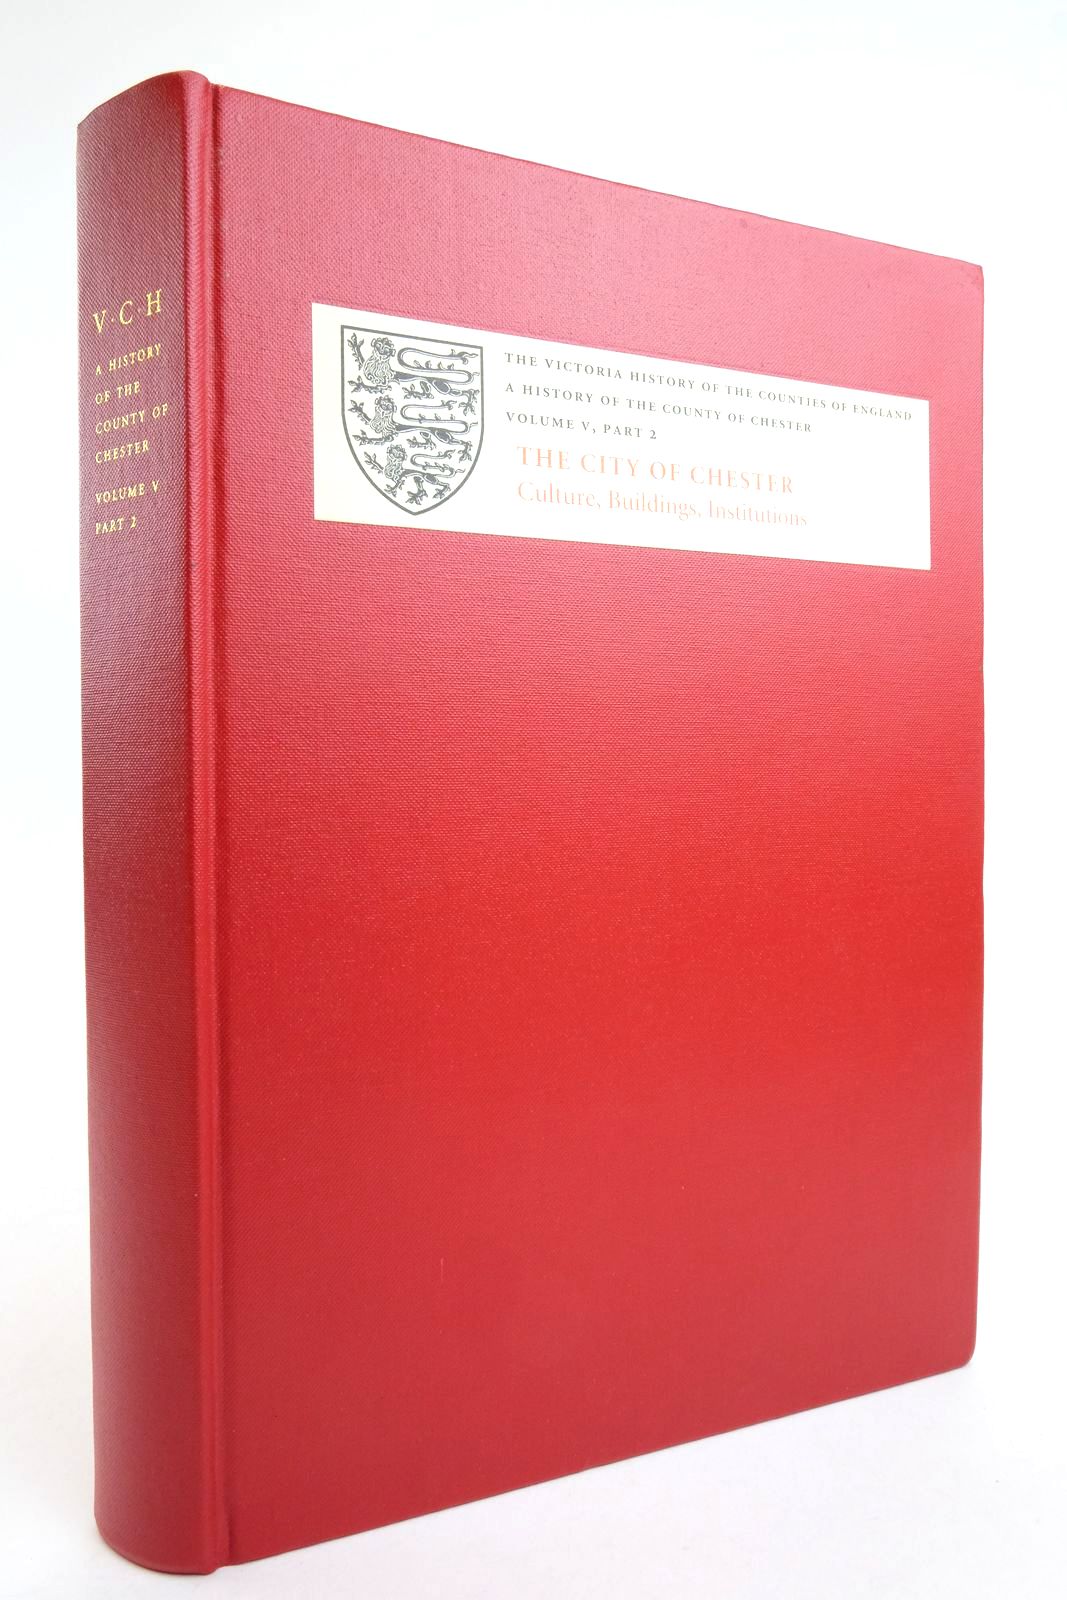 Photo of A HISTORY OF THE COUNTY OF CHESTER: VOLUME V, PART 2 THE CITY OF CHESTER: CULTURE, BUILDINGS, INSTITUTIONS written by Lewis, C.P. Thacker, A.T. published by Institute Of Historical Research (STOCK CODE: 2136483)  for sale by Stella & Rose's Books